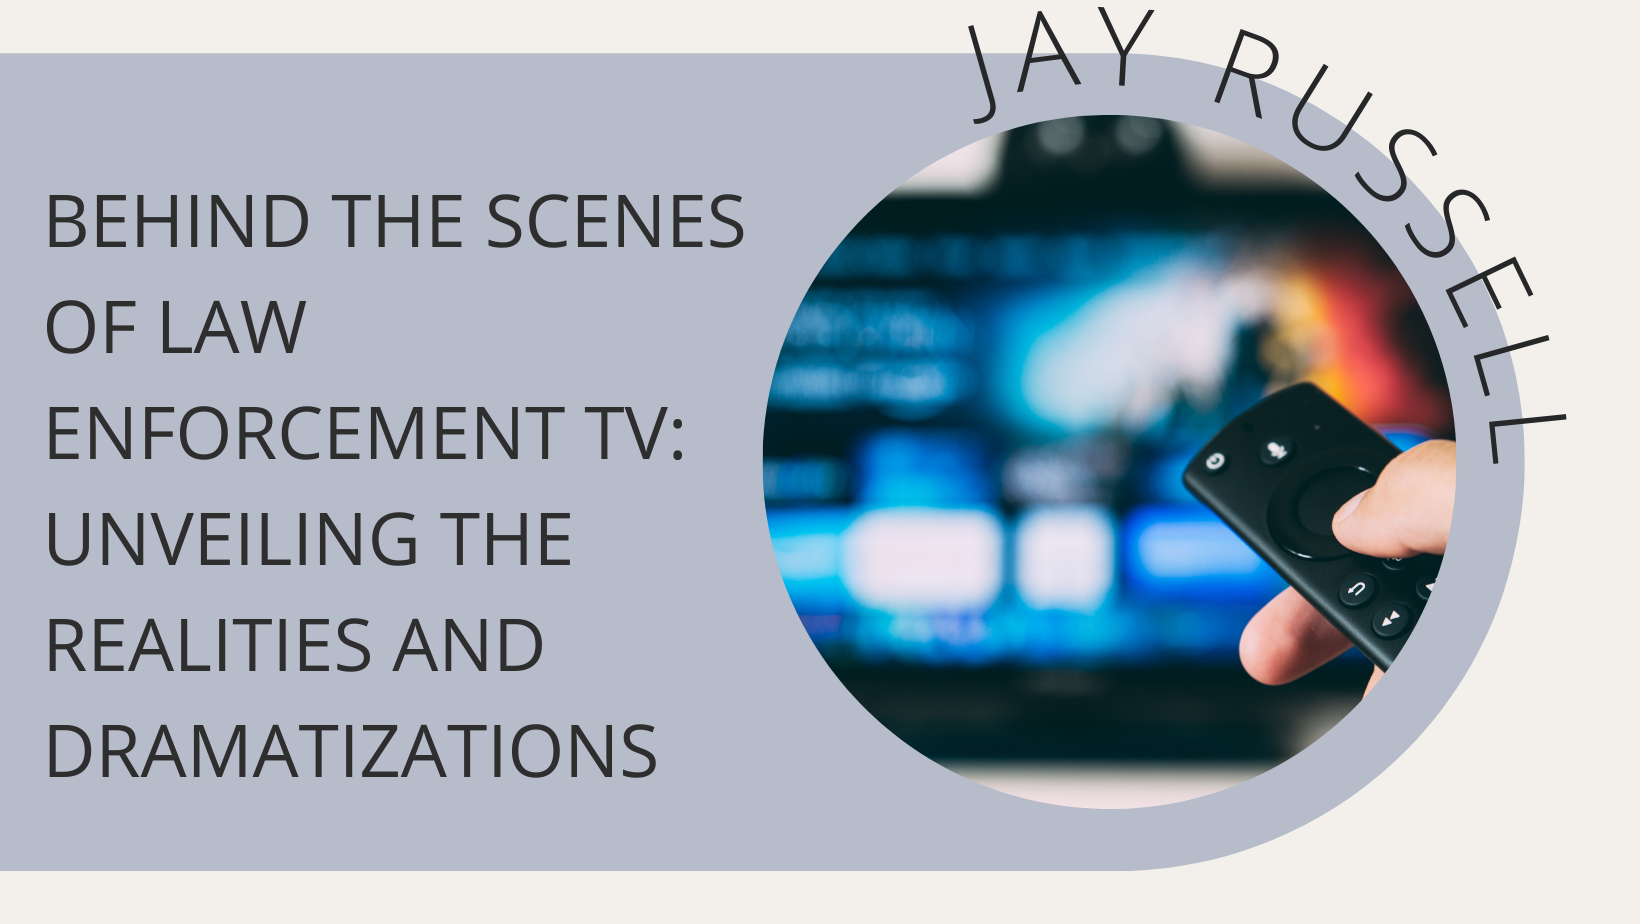 Behind the Scenes of Law Enforcement TV: Unveiling the Realities and Dramatizations